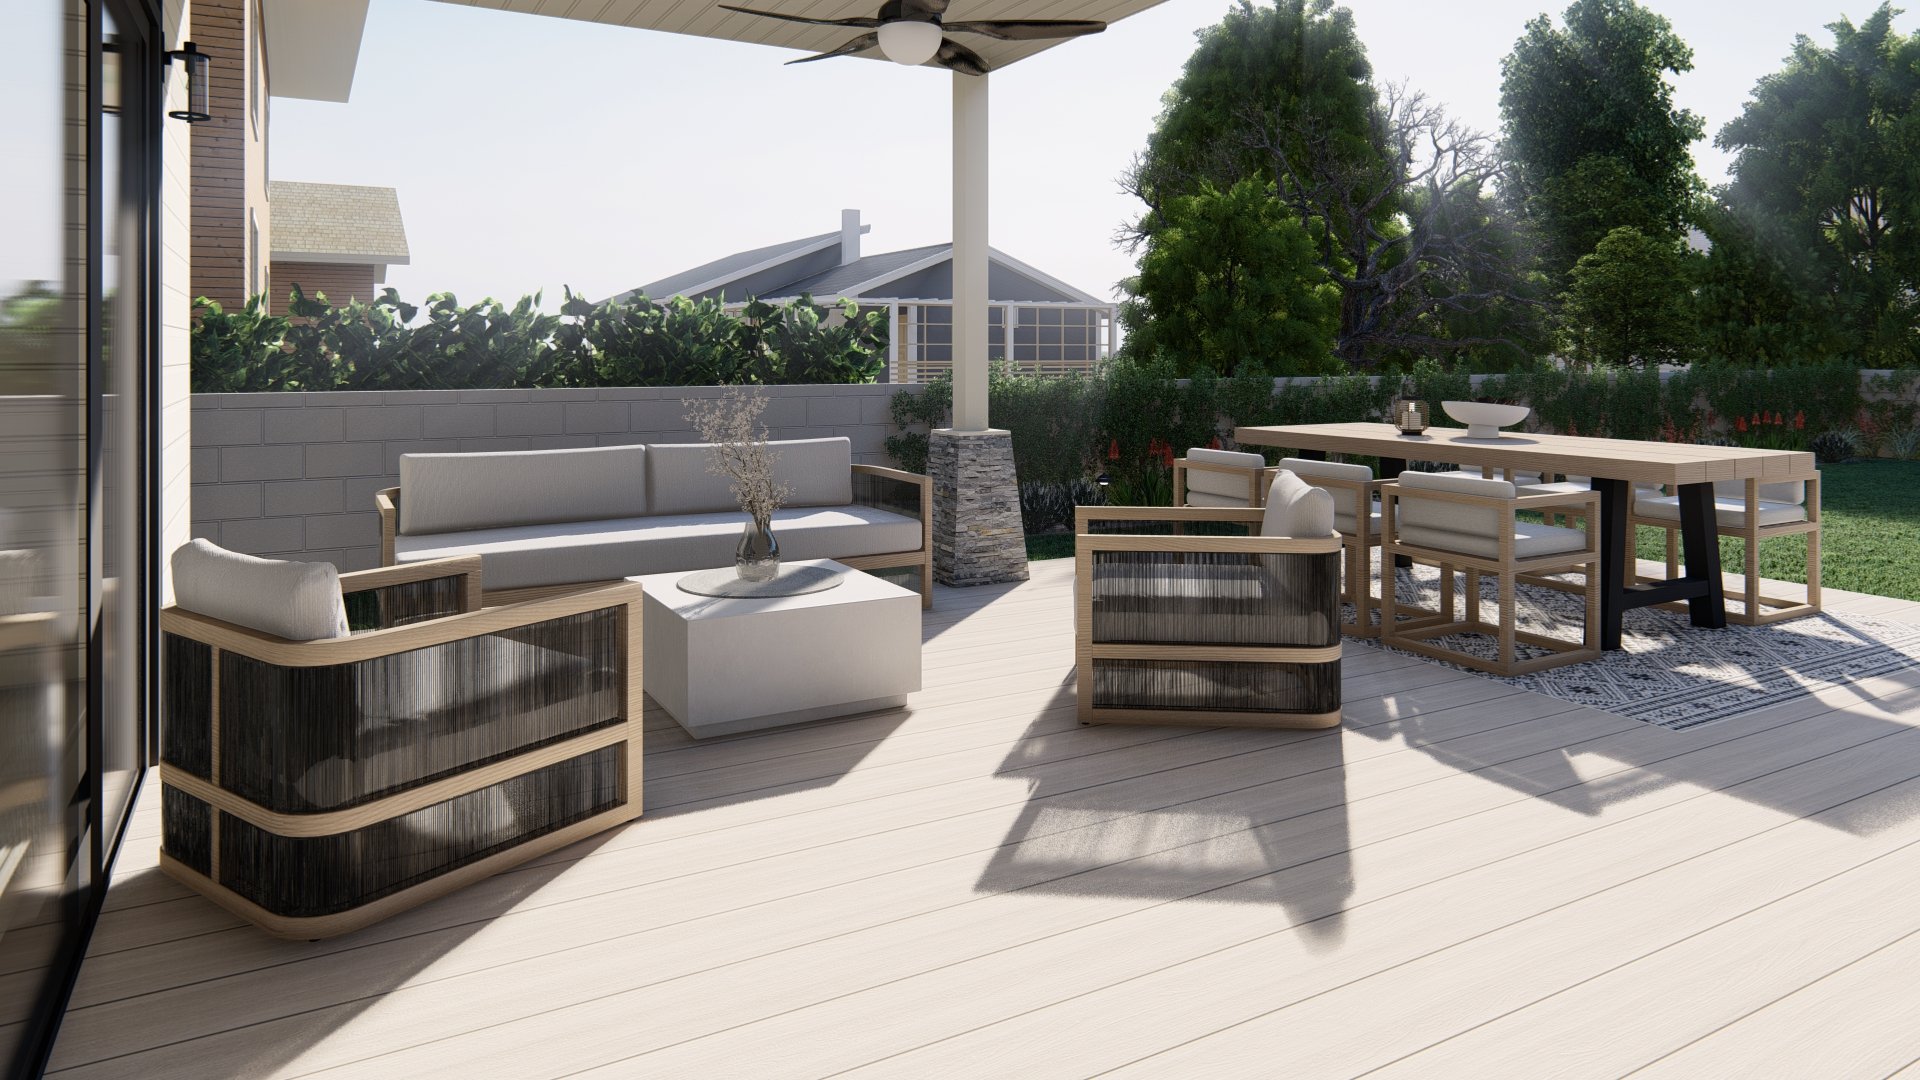 Backyard composite deck with Capri living room set and outdoor dining room.